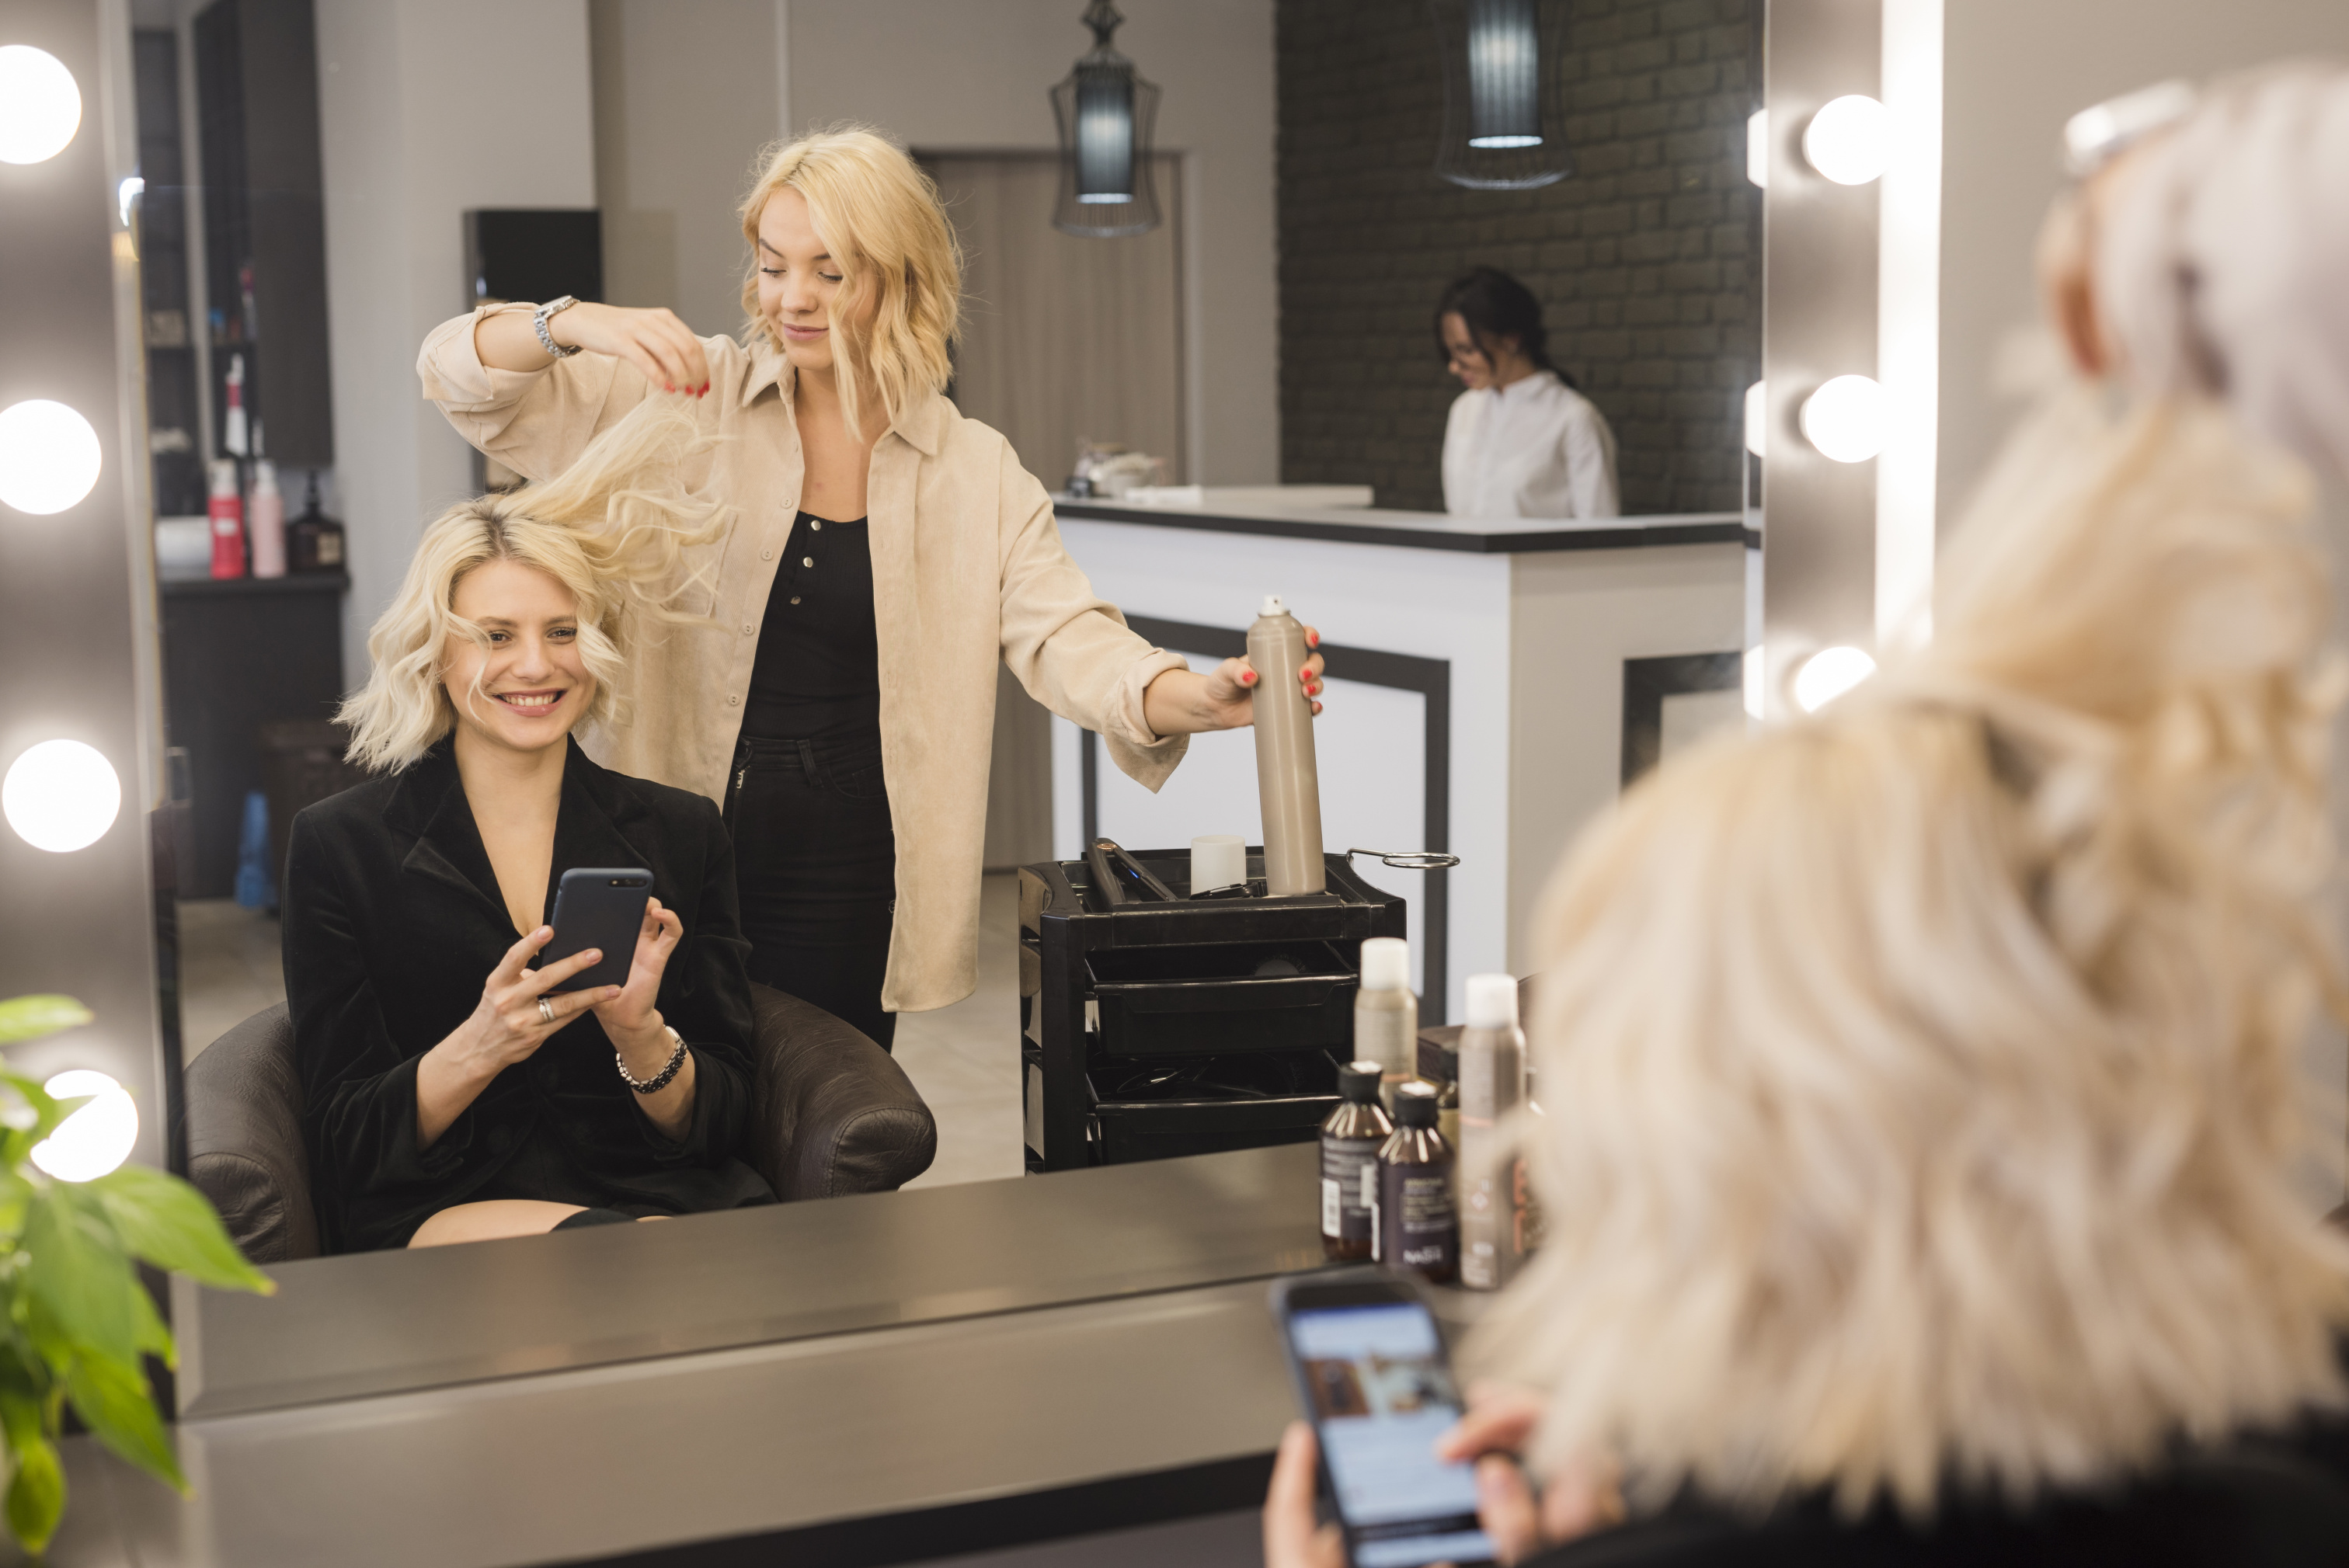 blonde-woman-with-mobile-phone-getting-her-hair-done.jpg